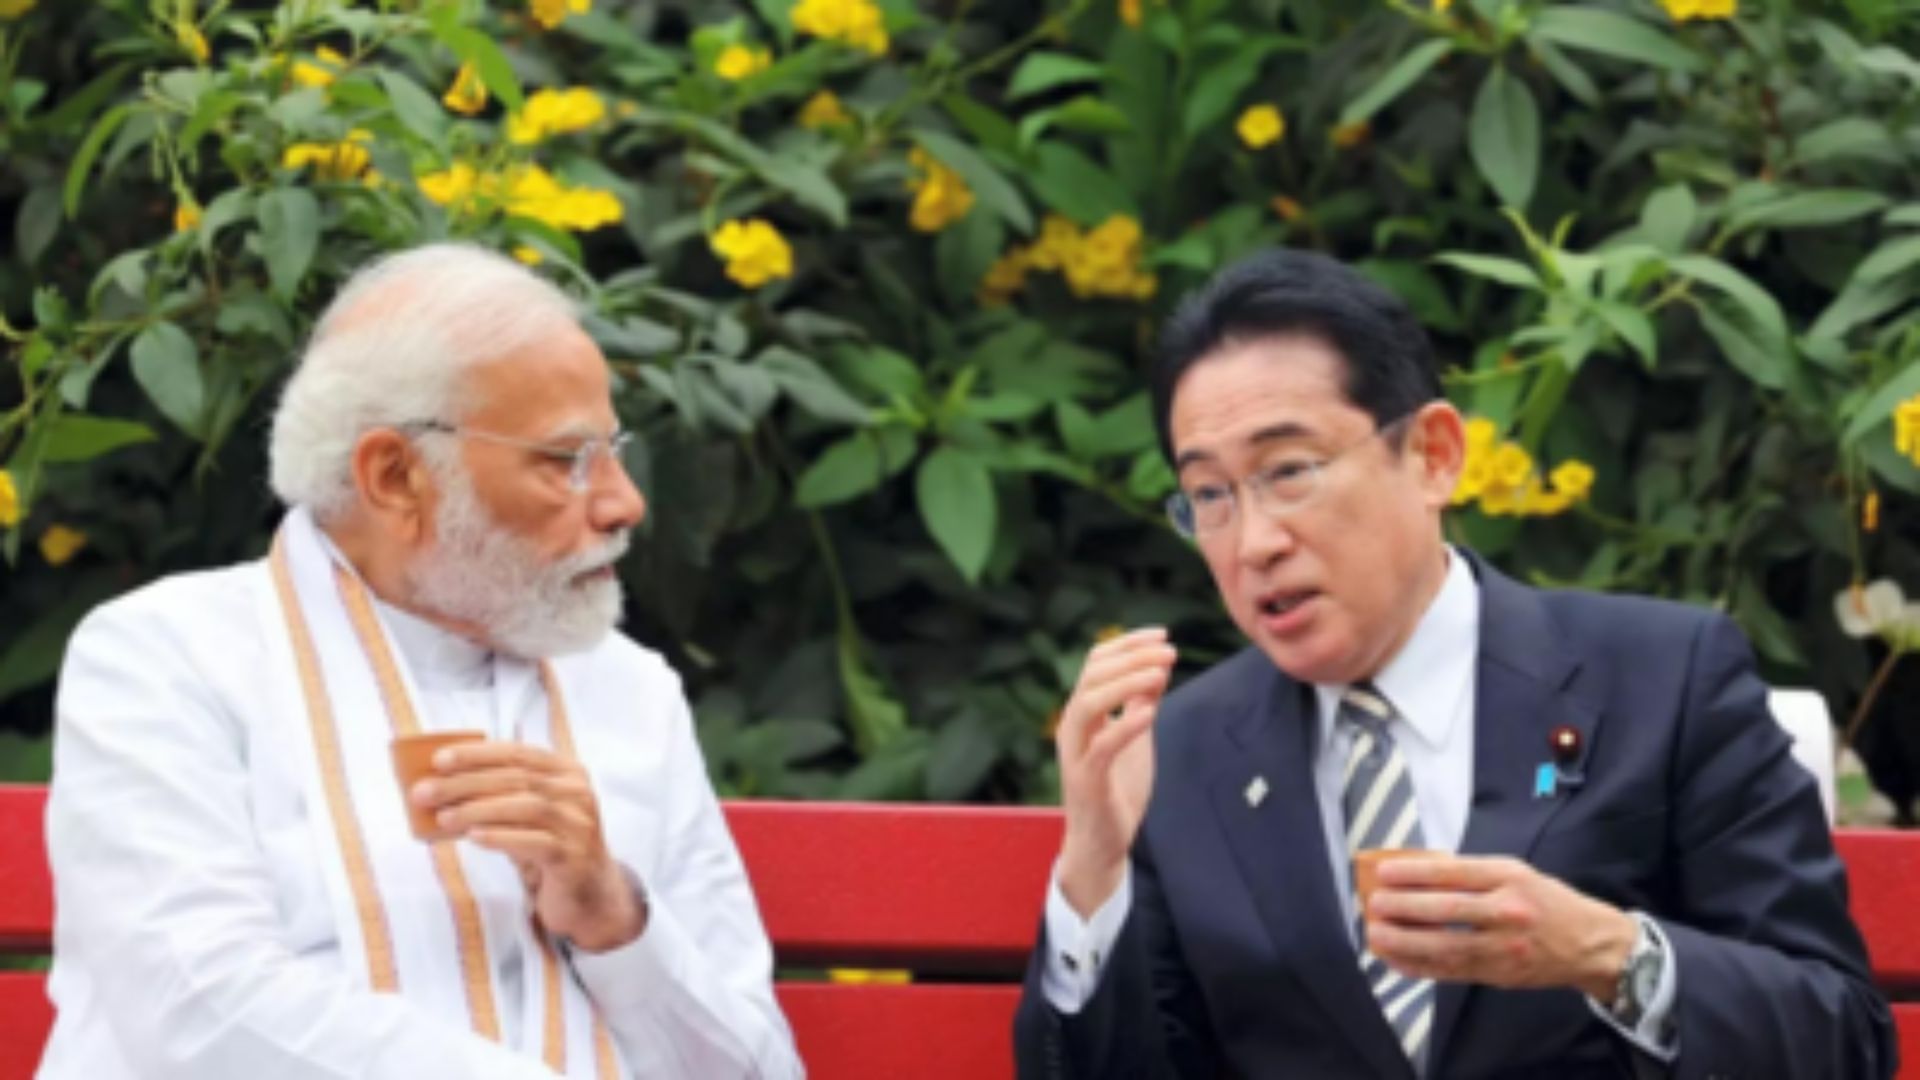 “We stand in solidarity with Japan”: PM Modi